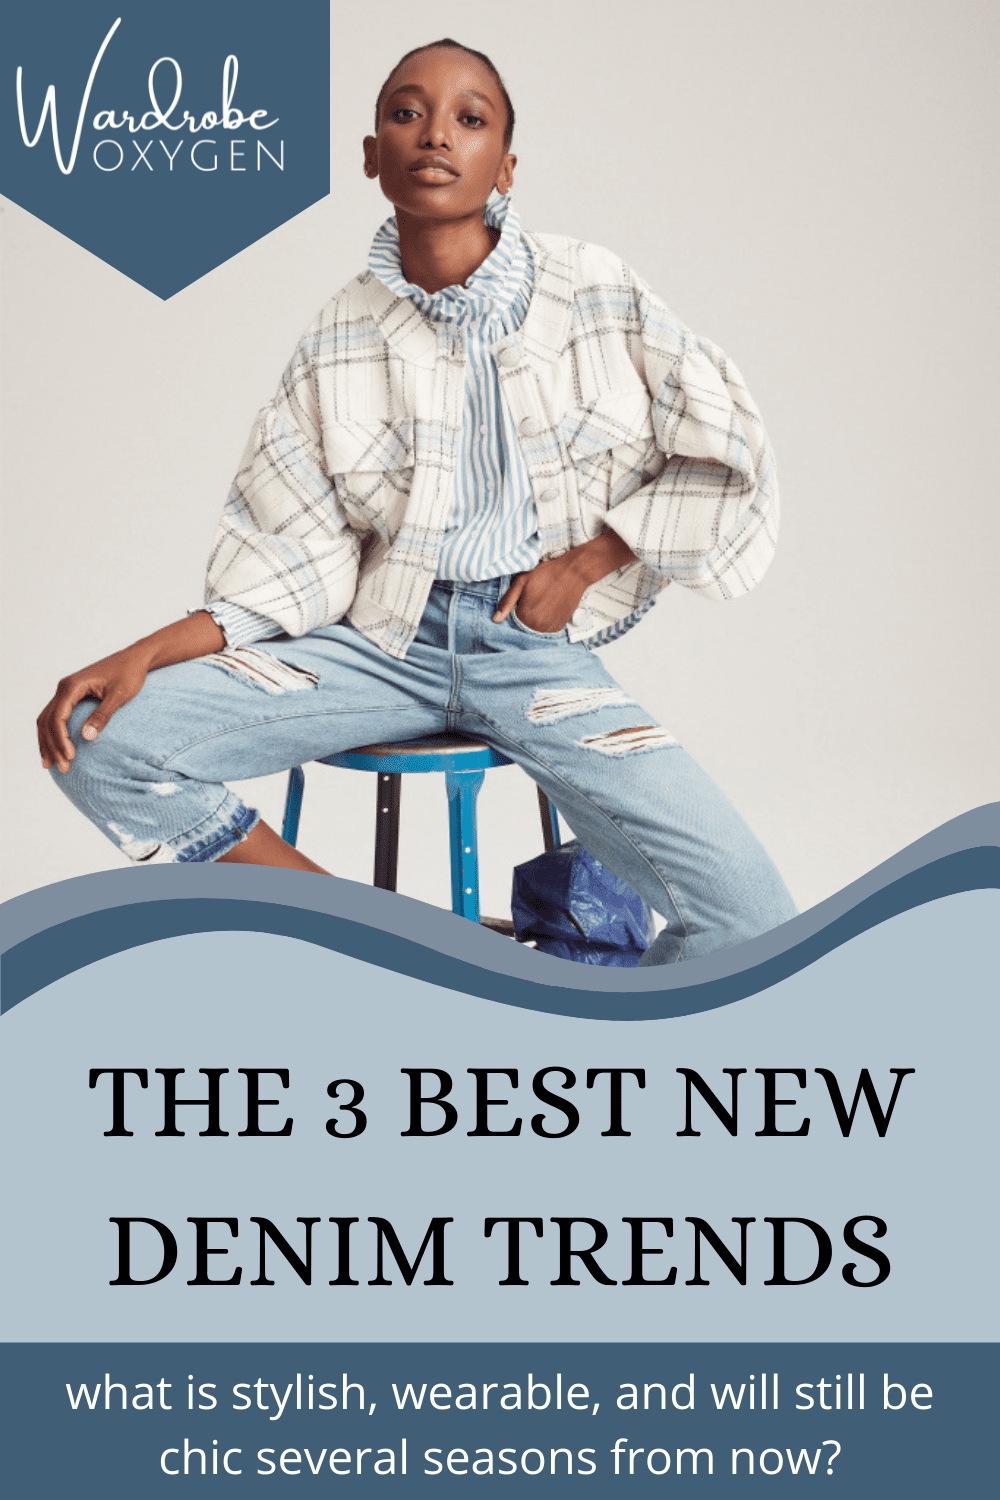 20 Ideas How To Wear Bootcut Jeans The Right Way 2021  How to wear bootcut  jeans, Bootleg jeans outfit, Bootcut jeans outfit